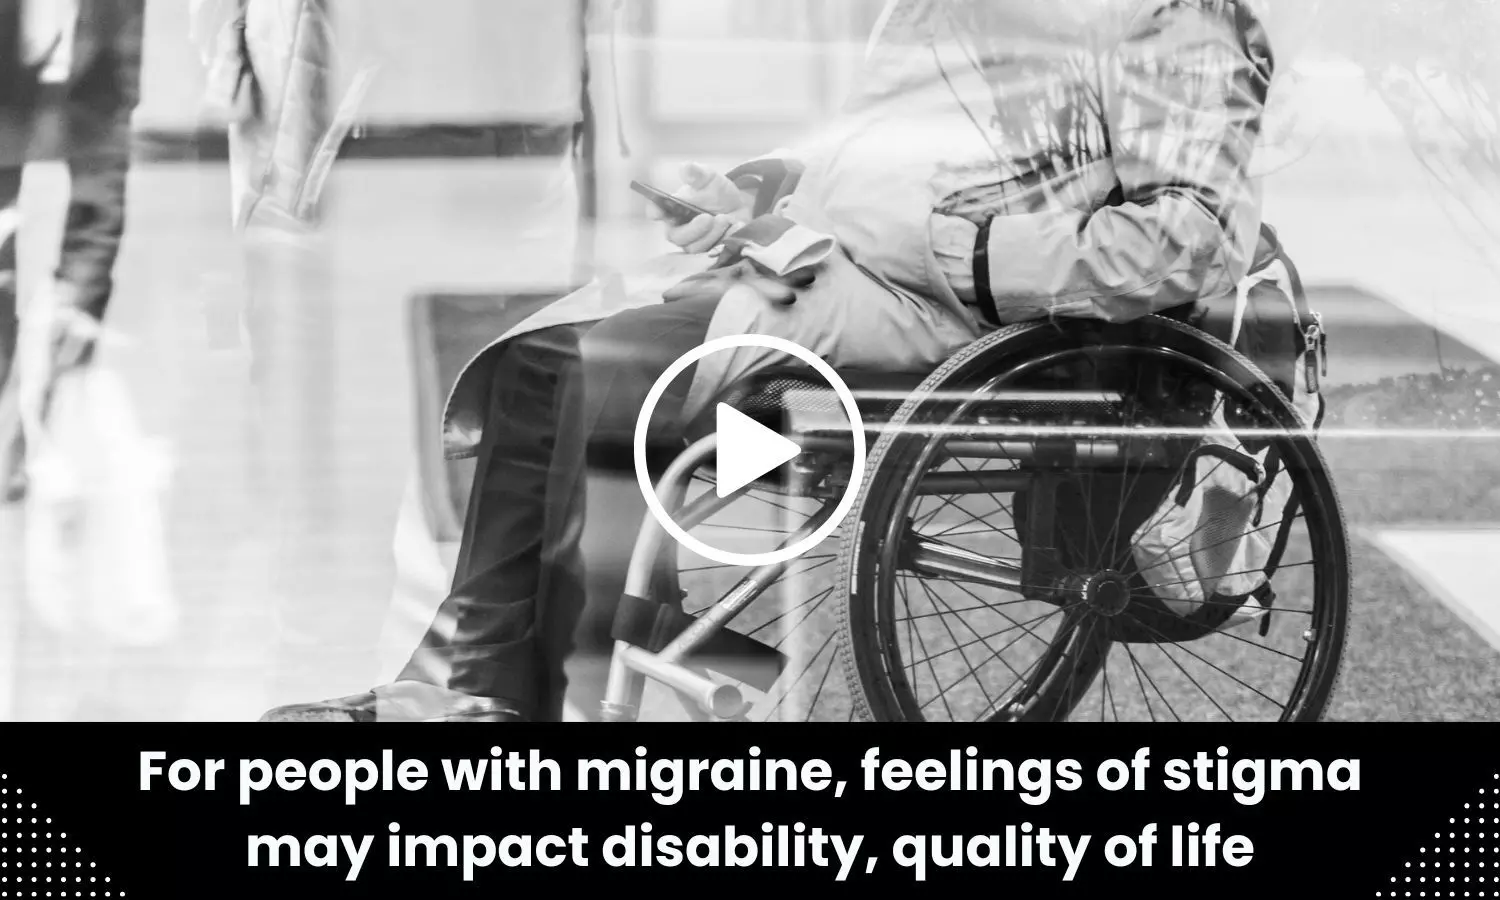 Migraine, causes feelings of stigma that impact disability, quality of life